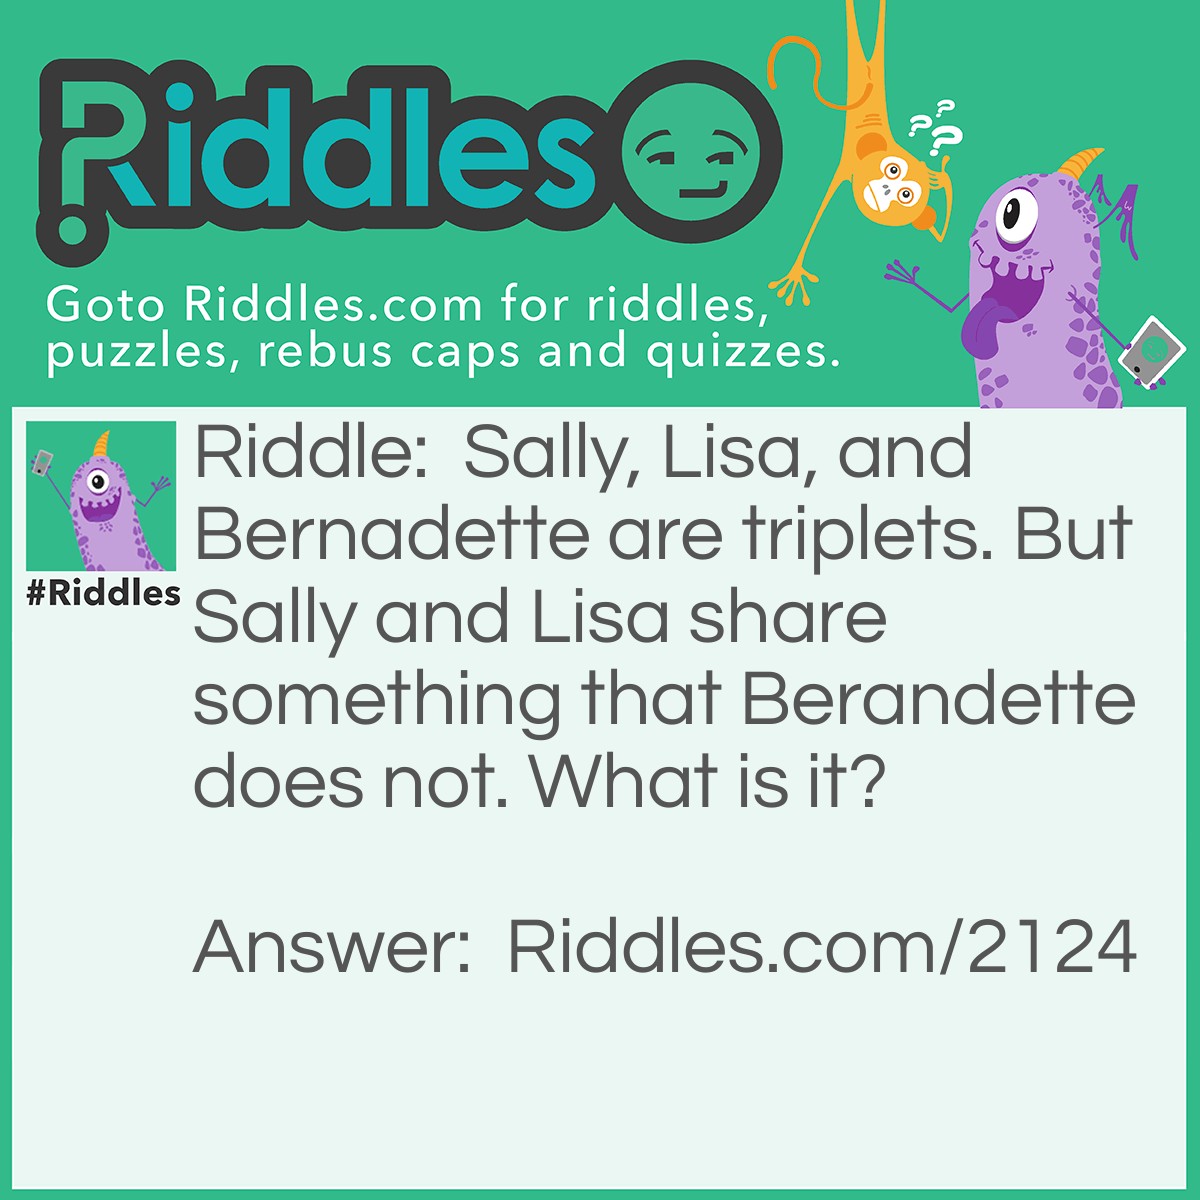 Riddle: Sally, Lisa, and Bernadette are triplets. But Sally and Lisa share something that Berandette does not. What is it? Answer: The letter L in their names.